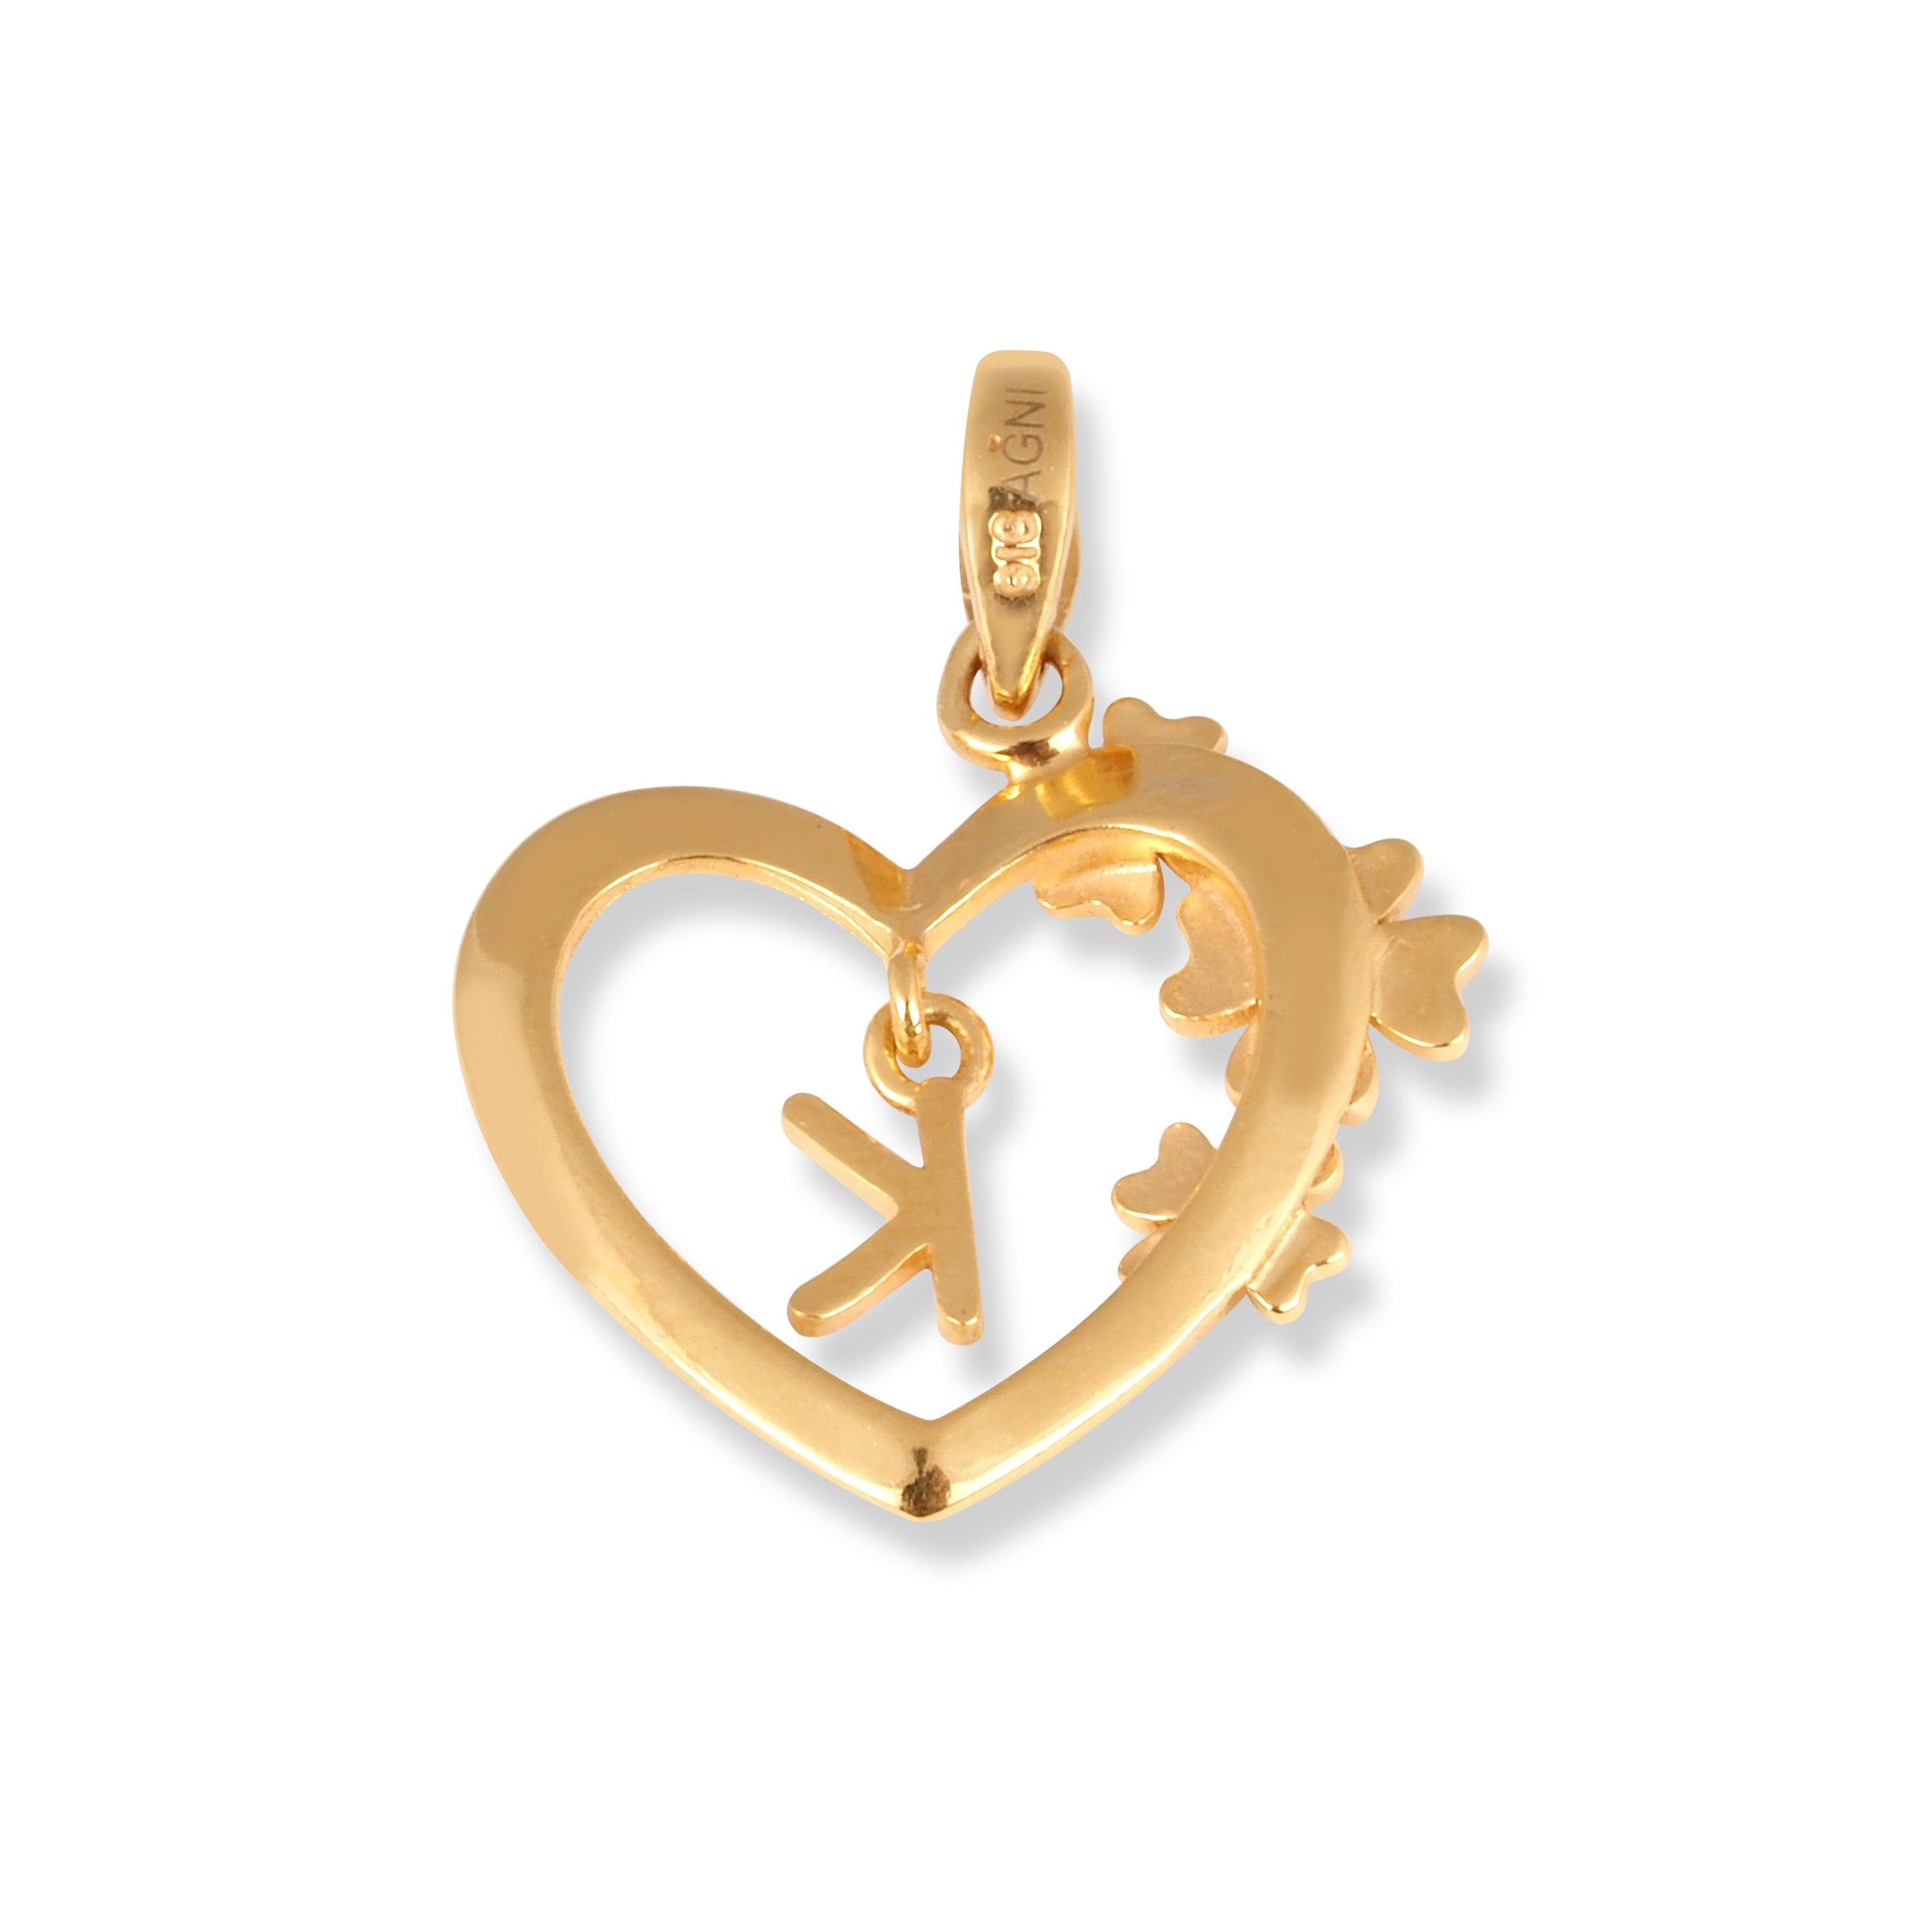 'K' 22ct Gold Heart Shape Initial Pendant with Flower Design P-7035-K - Minar Jewellers